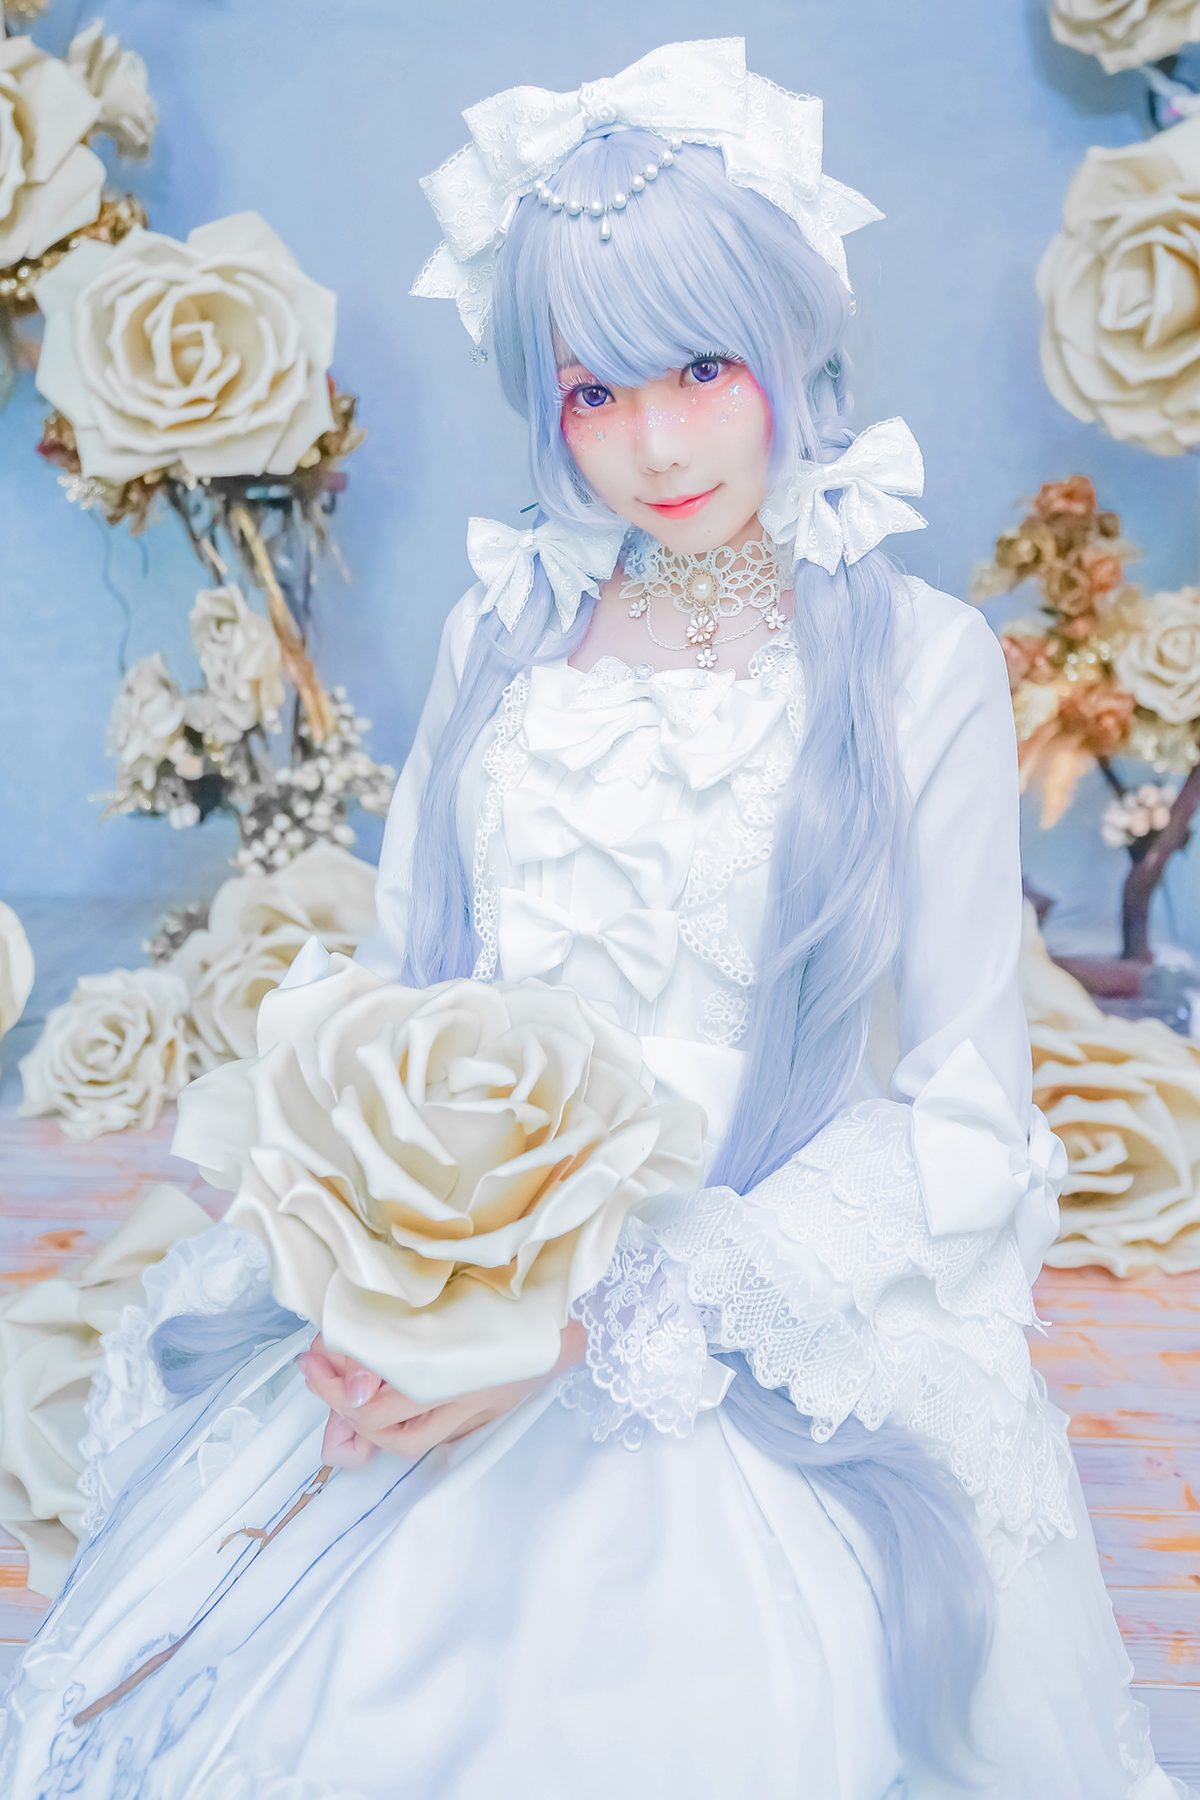 Coser@Ely_eee ElyEE子 TUESDAY TWINTAIL A 0053 0391642026.jpg